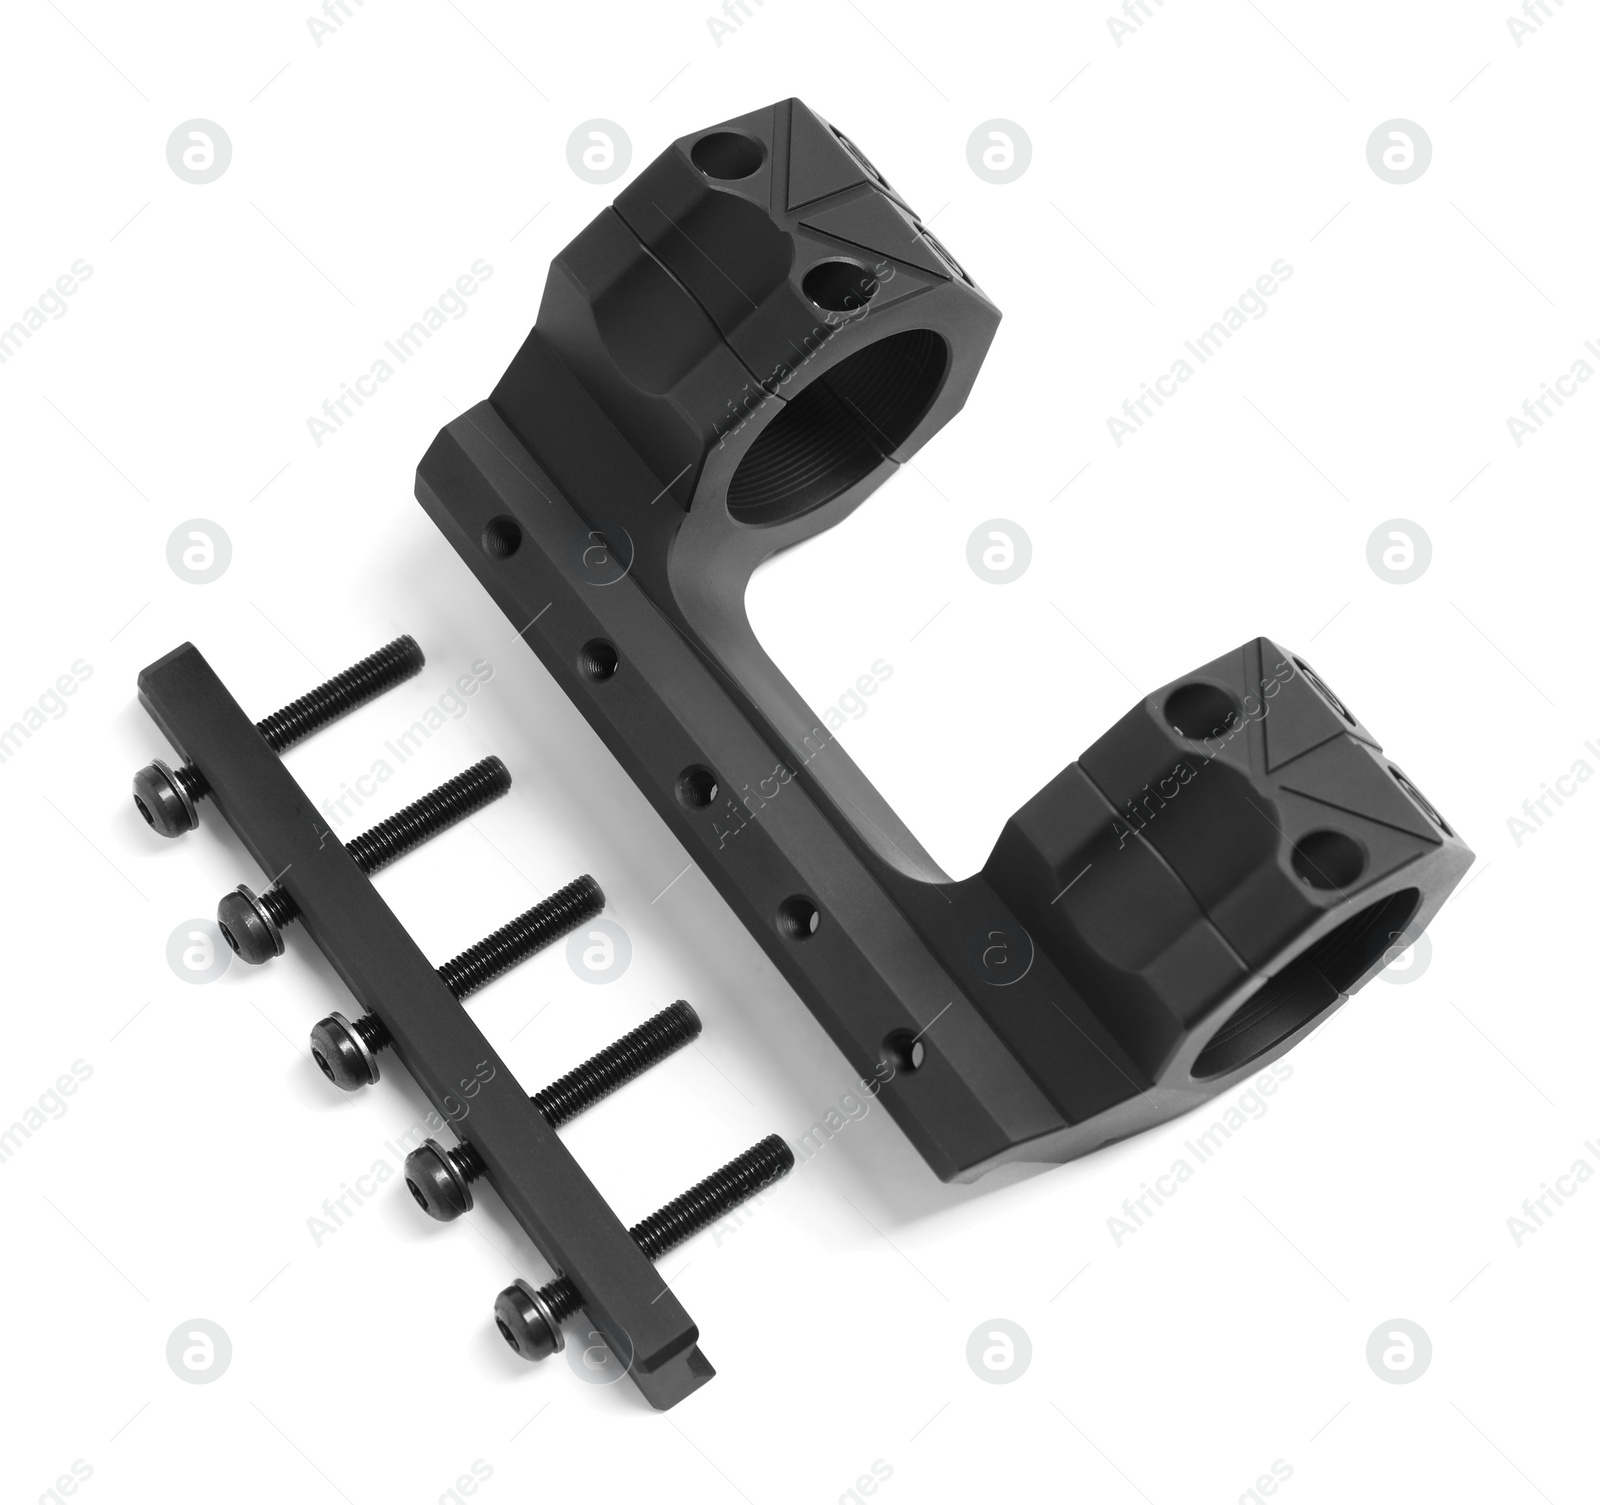 Photo of Disassembled quick disconnect sniper cantilever scope mount on white background, above view